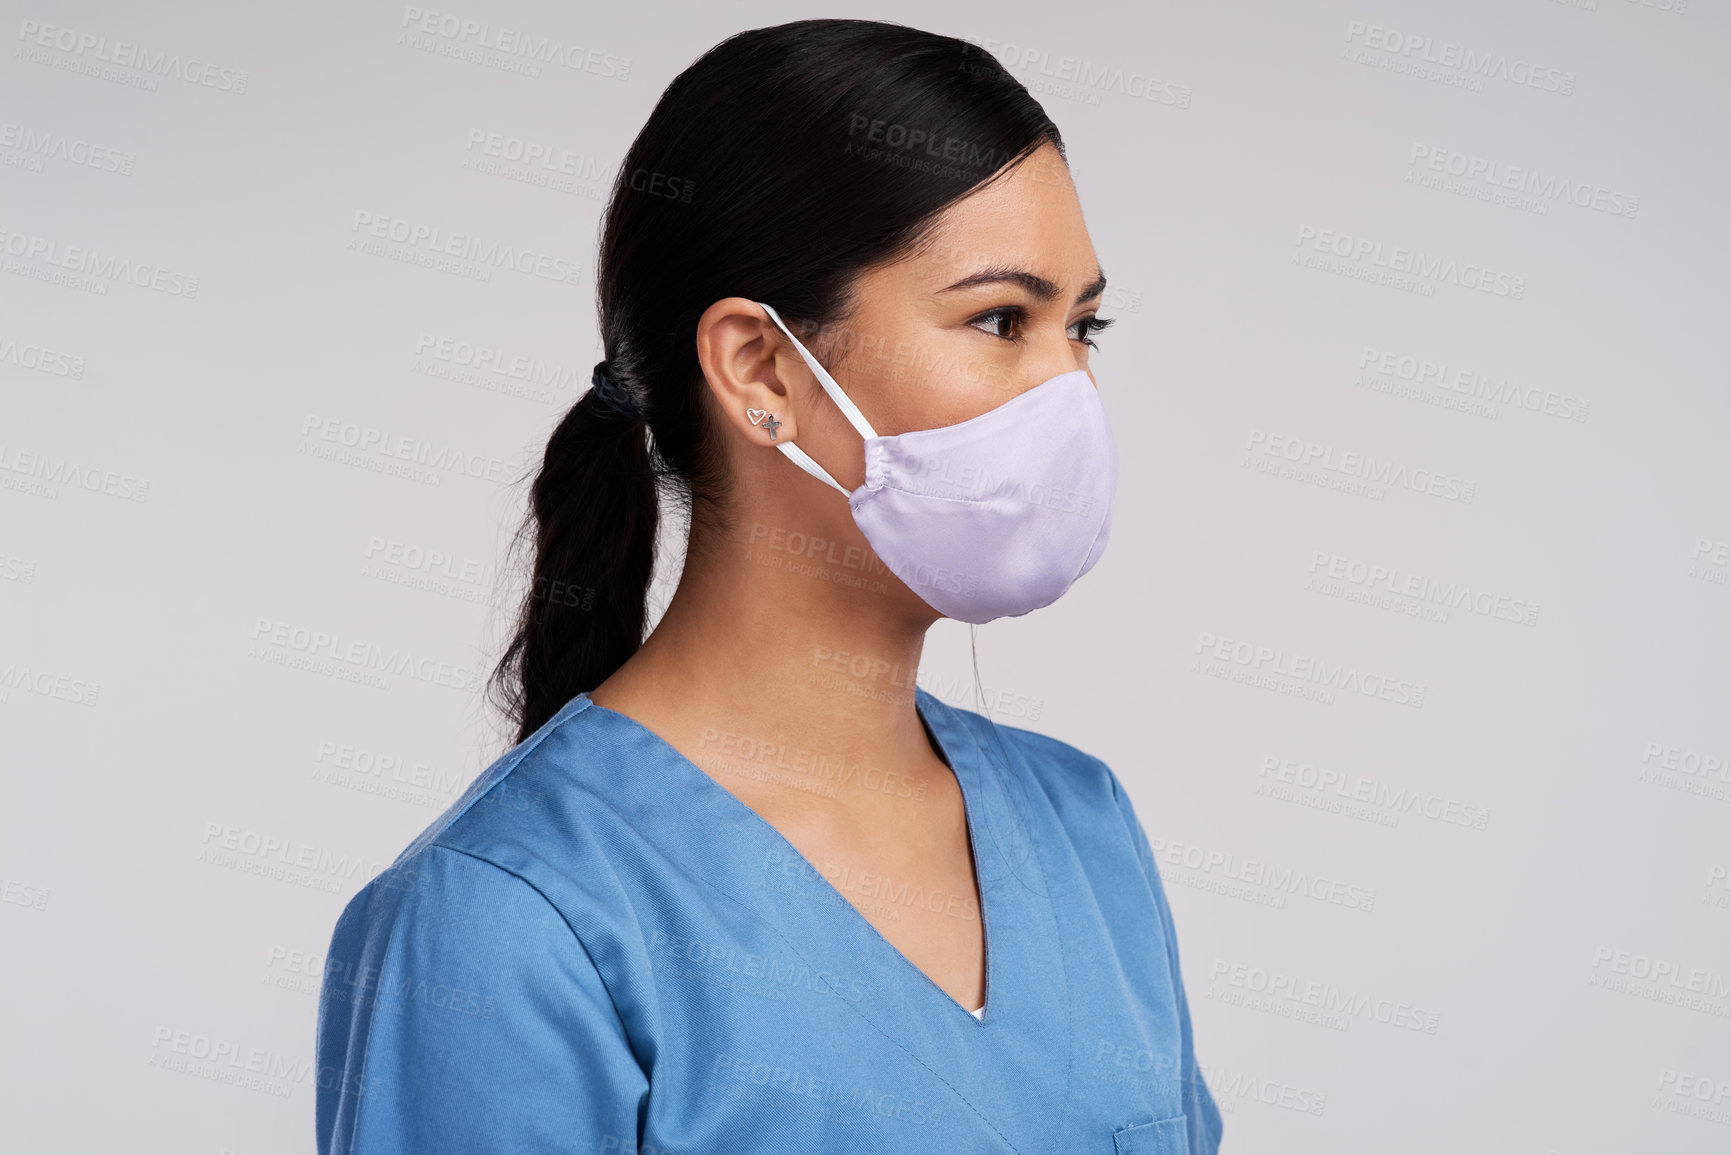 Buy stock photo Side shot of a young doctor wearing a surgical face mask against a white background